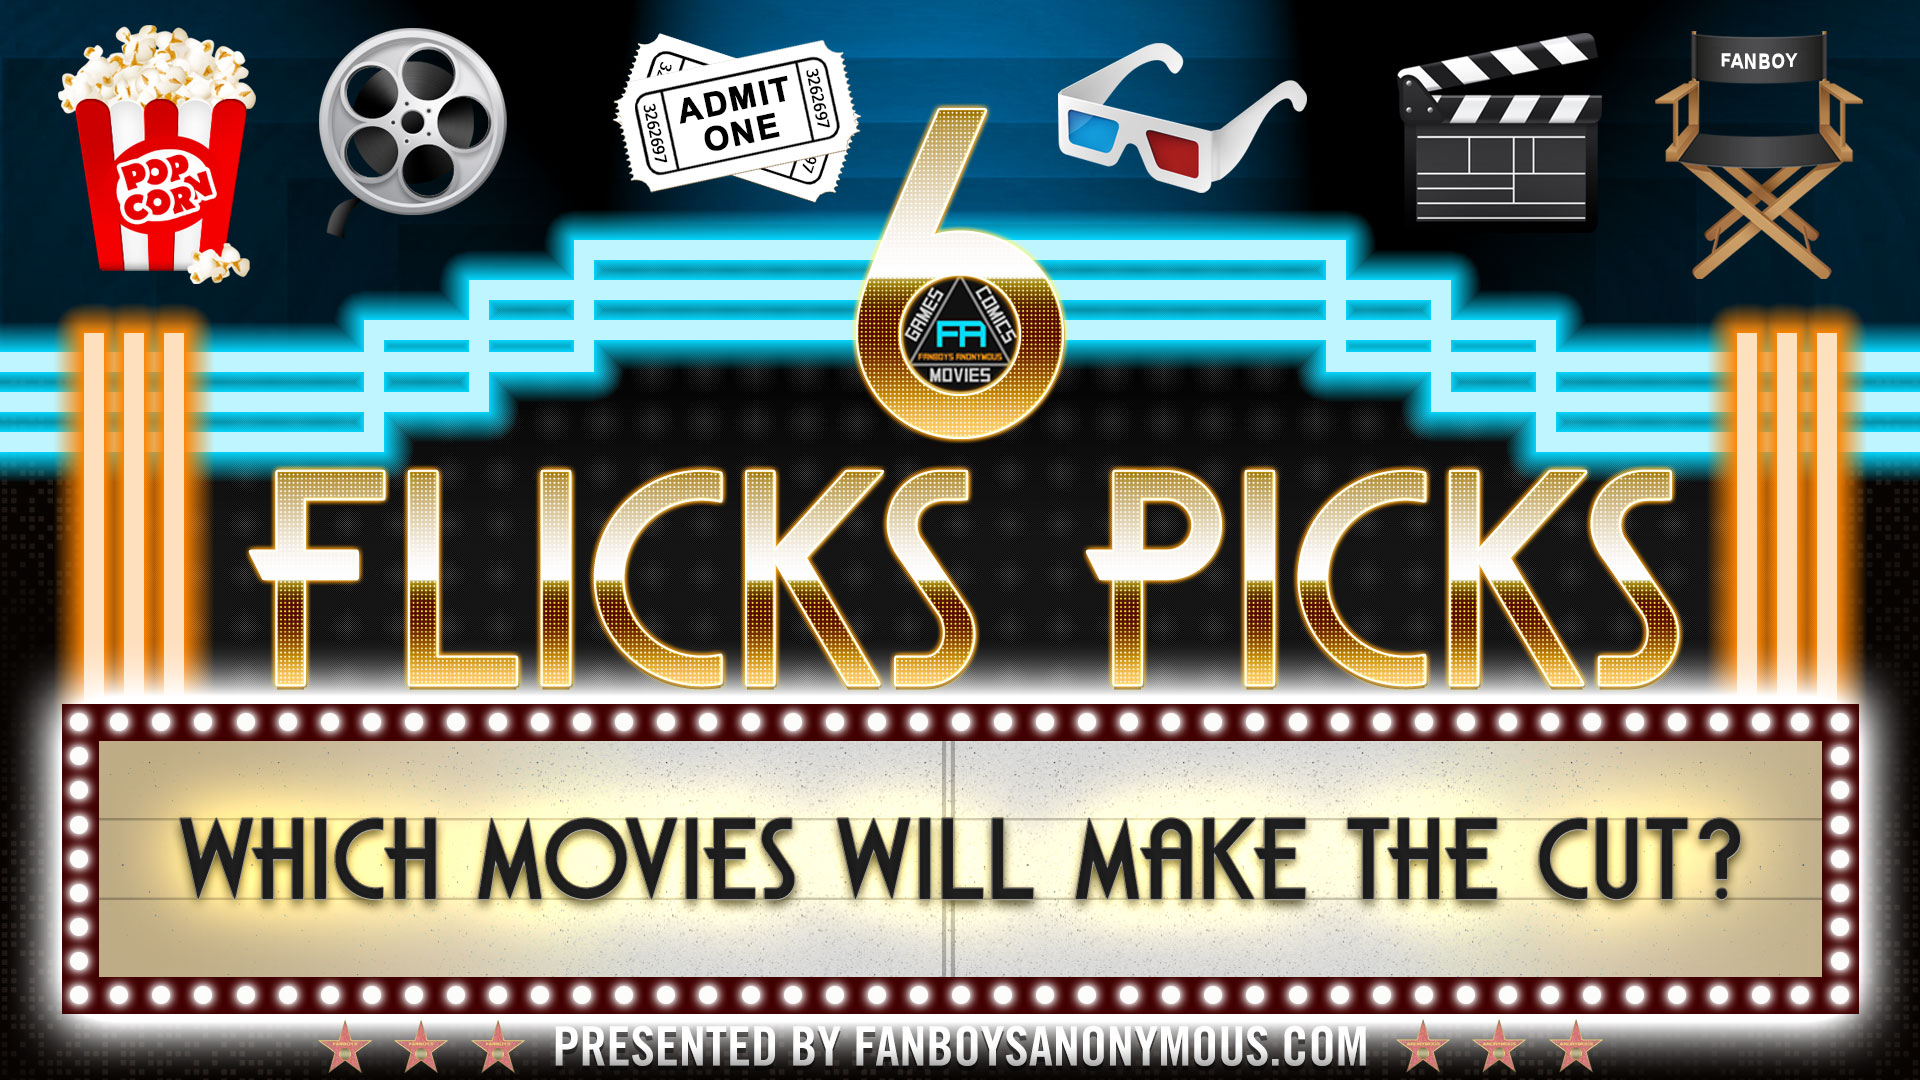 What movies are coming out TheMonth 2022 6 Flicks Picks